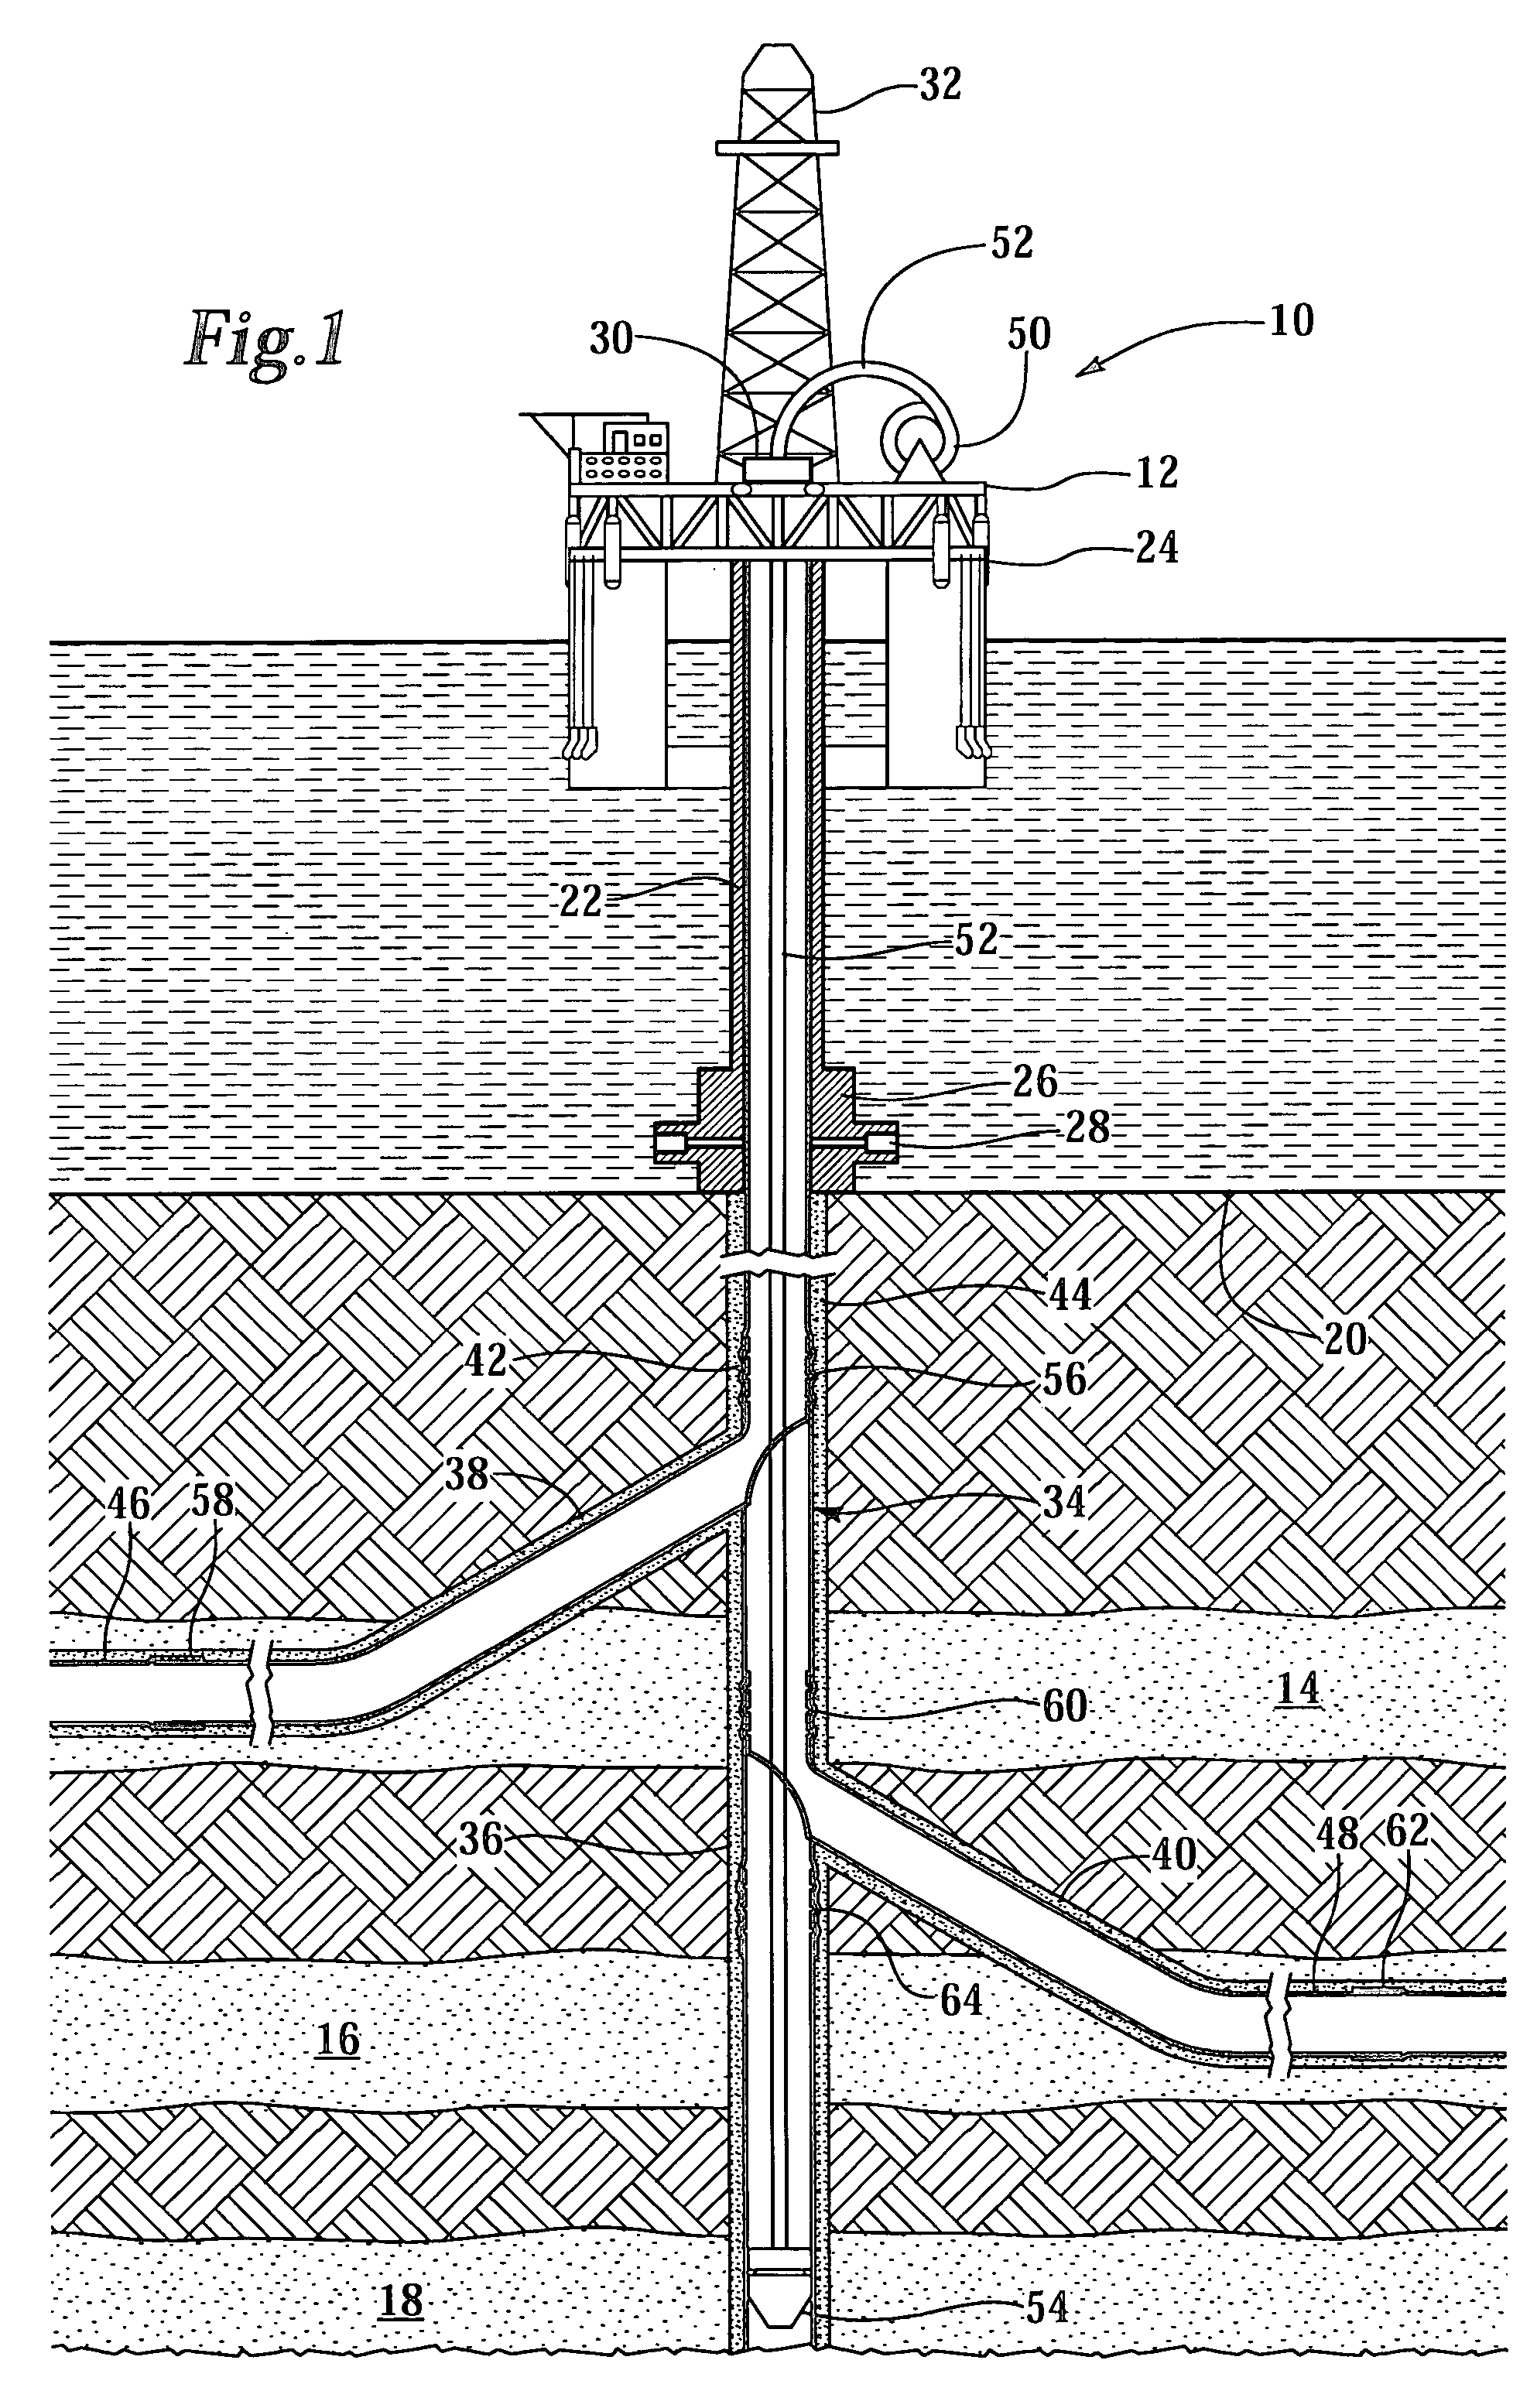 Monobore wellbore and method for completing same